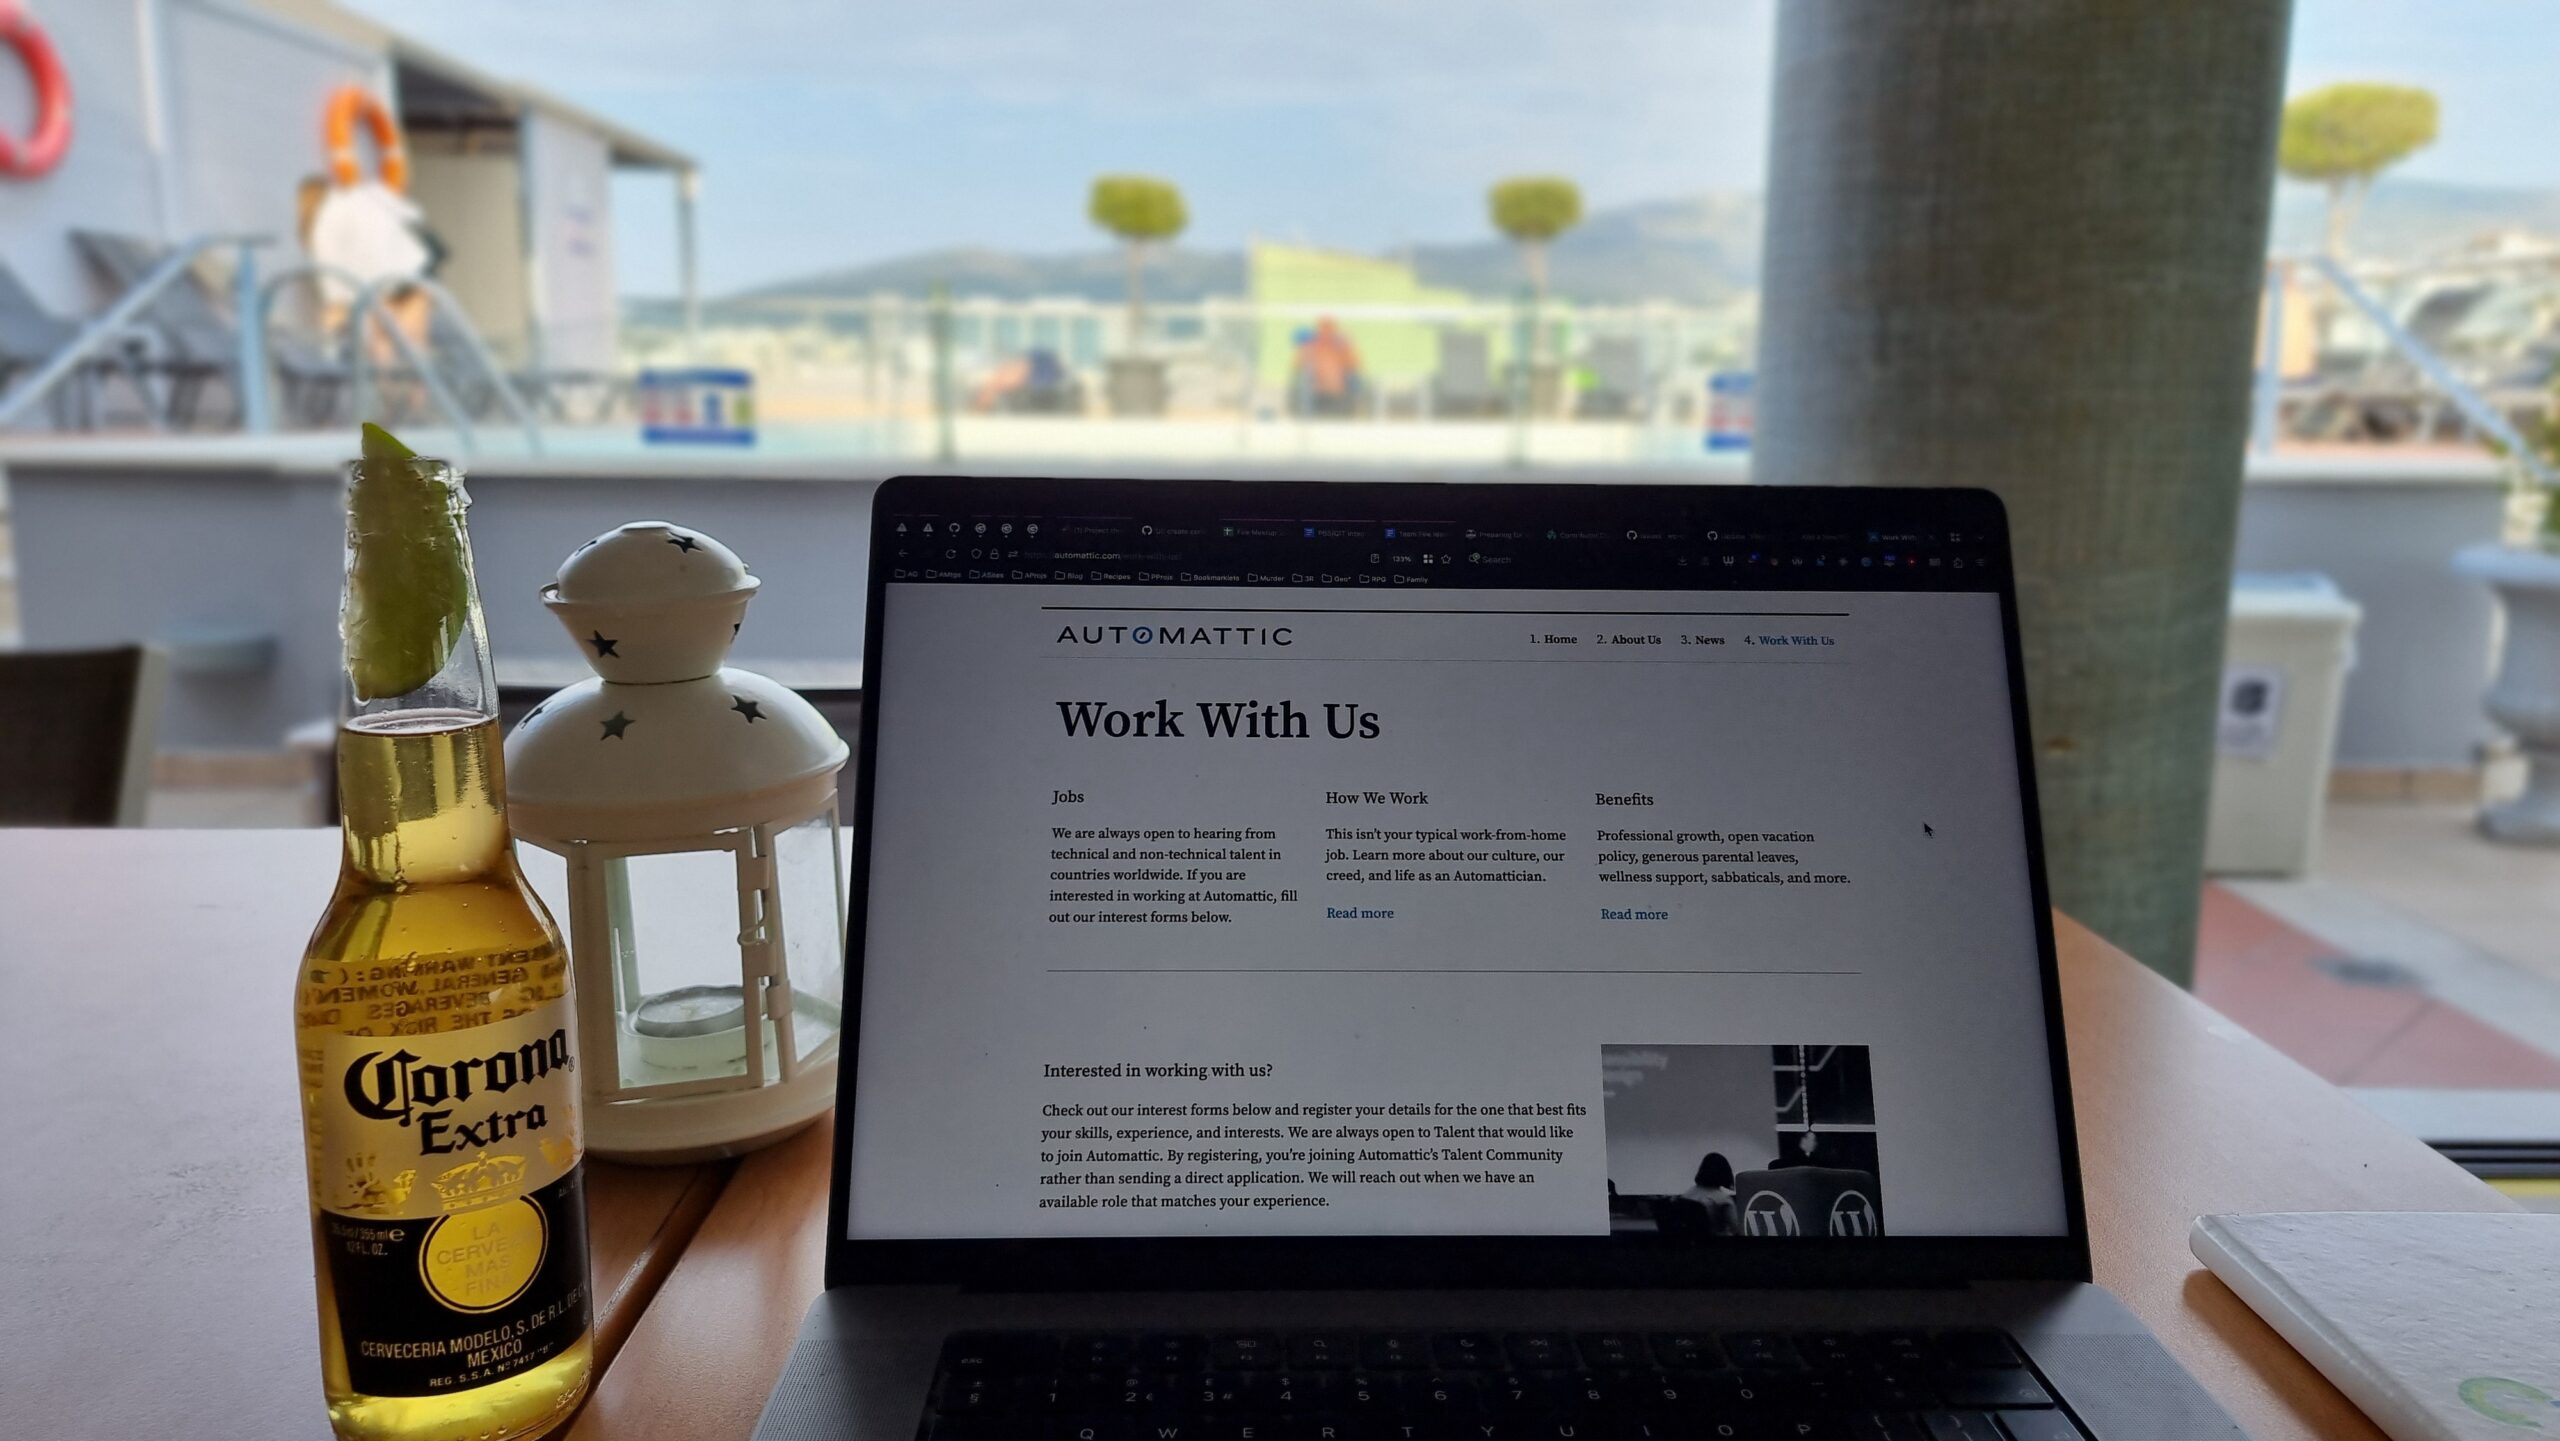 MacBook showing an Automattic "Work For Us" web page, alongside a bottle of Corona Extra. A rooftop terrace garden and swimming pool can be seen in the background.